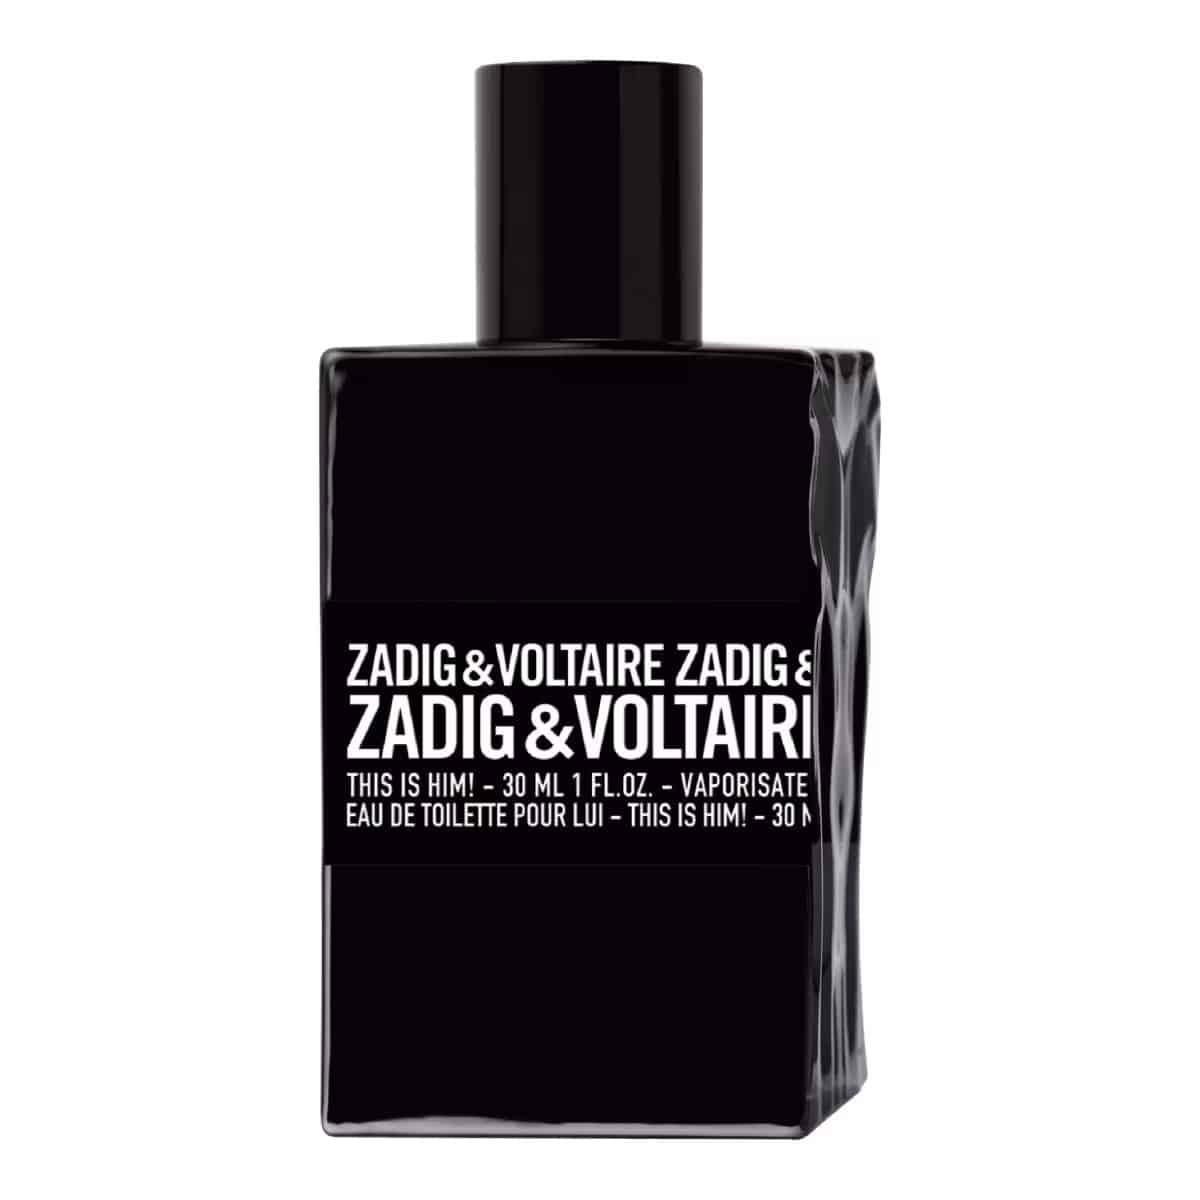 Soldes Parfums - This is Him! Zadig & Voltaire